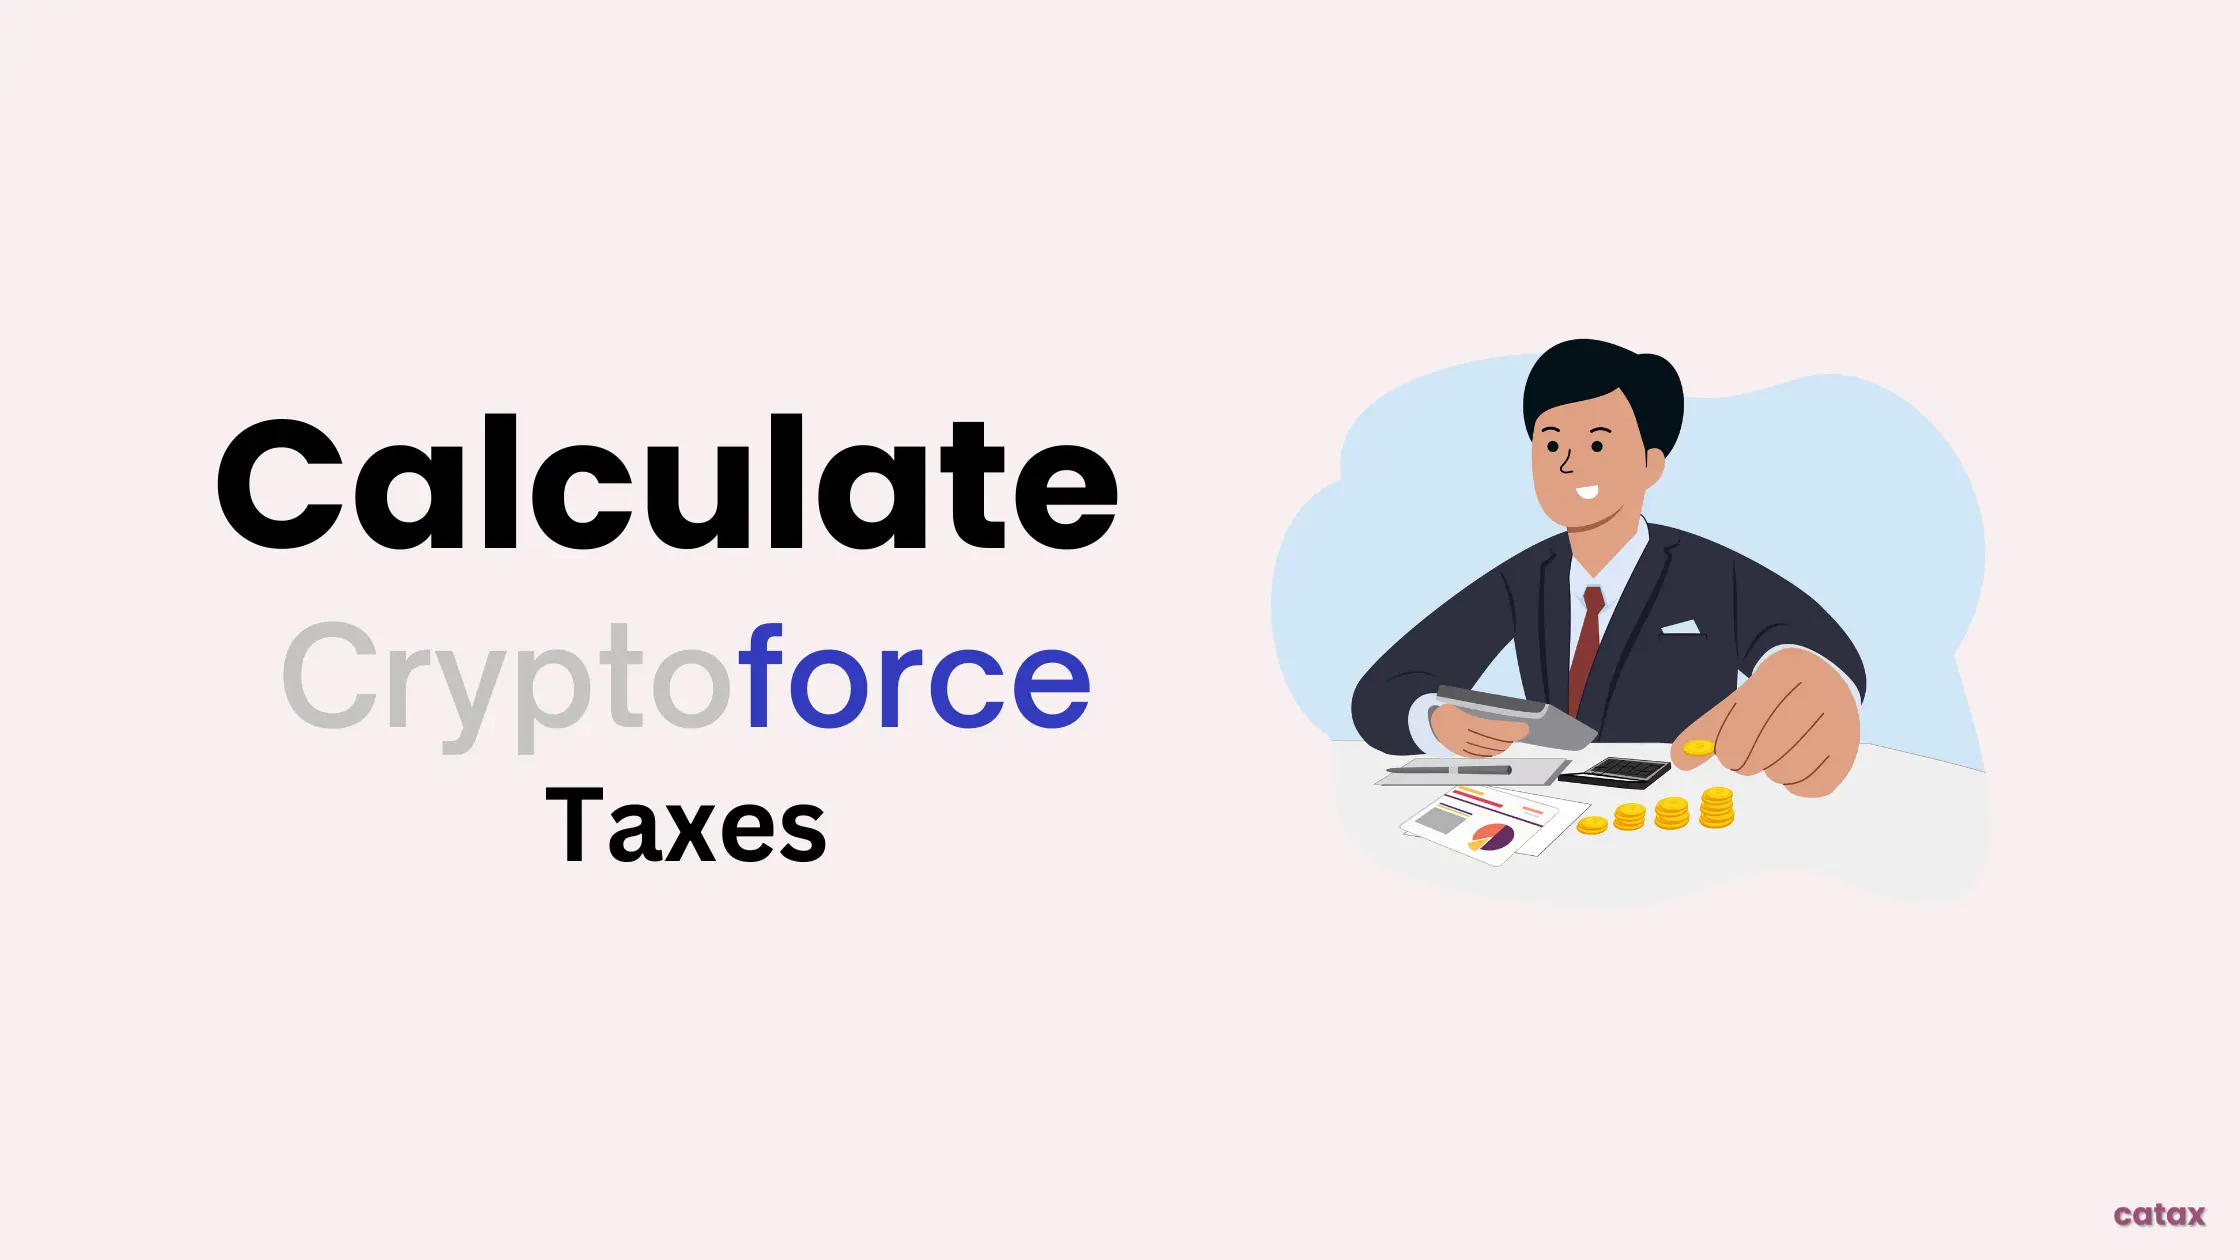 How to Calculate My Cryptoforce Taxes?